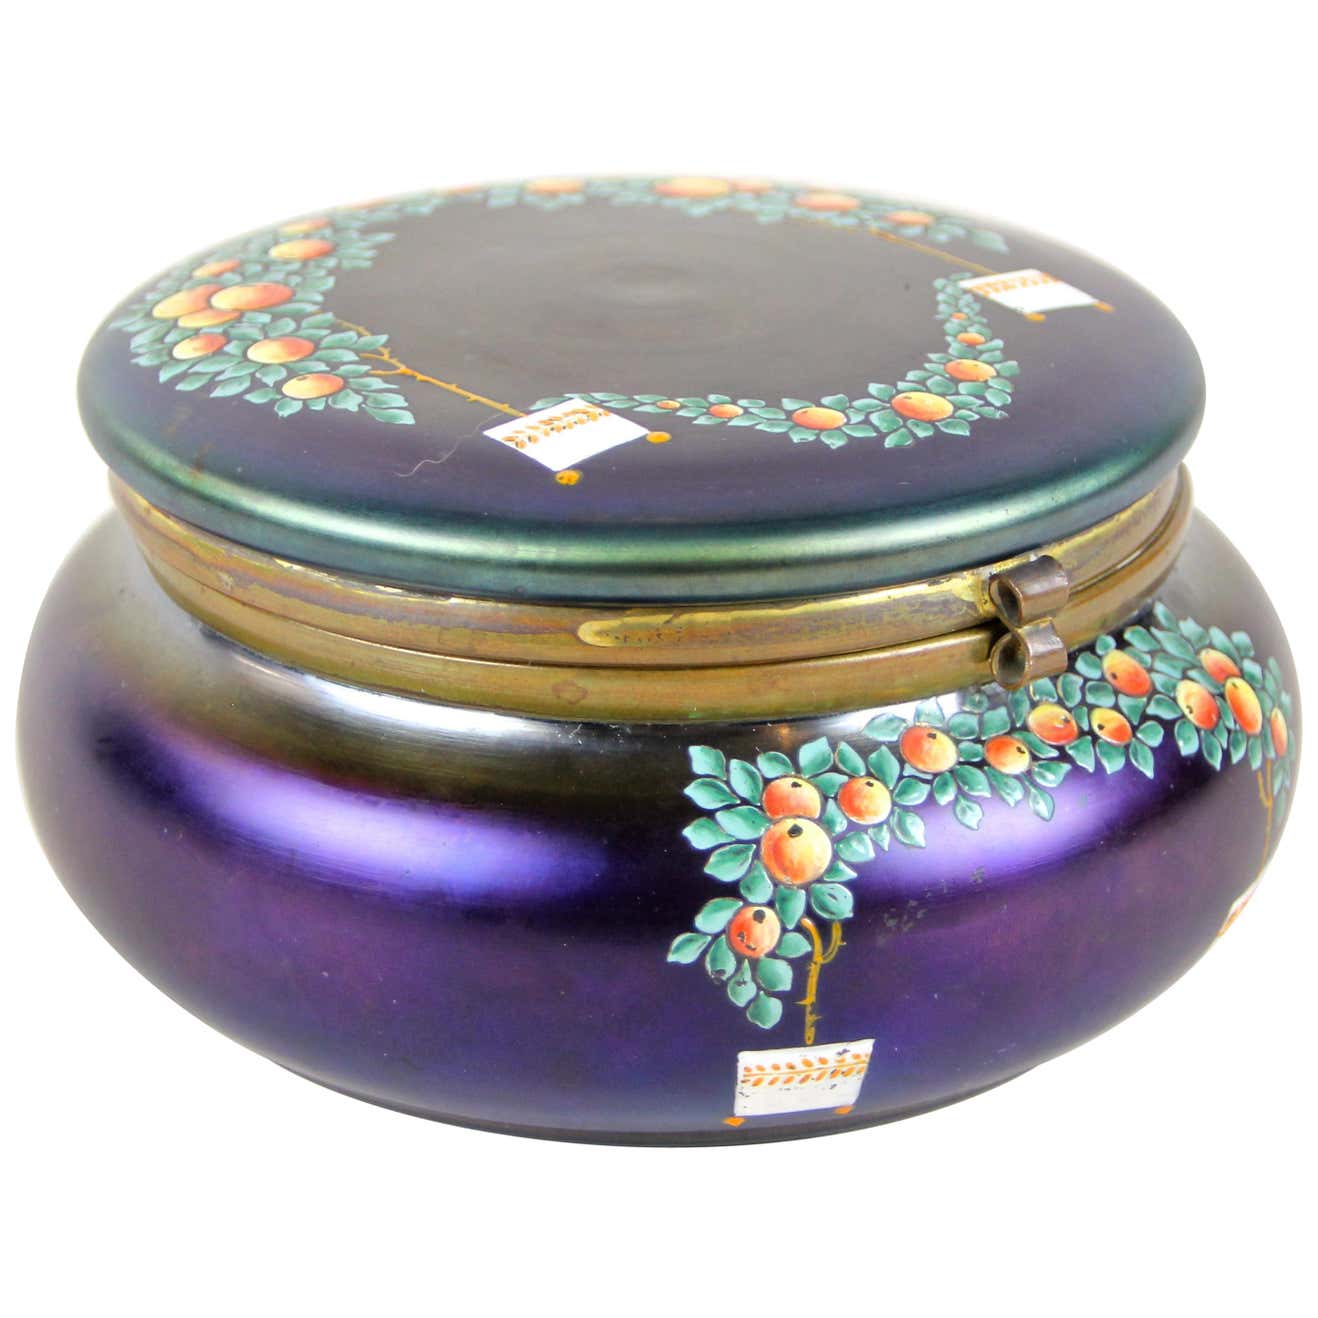 Iriscident Glass Box With Lid And Enamel Paintings Bohemia Circa 1910 At 1stdibs